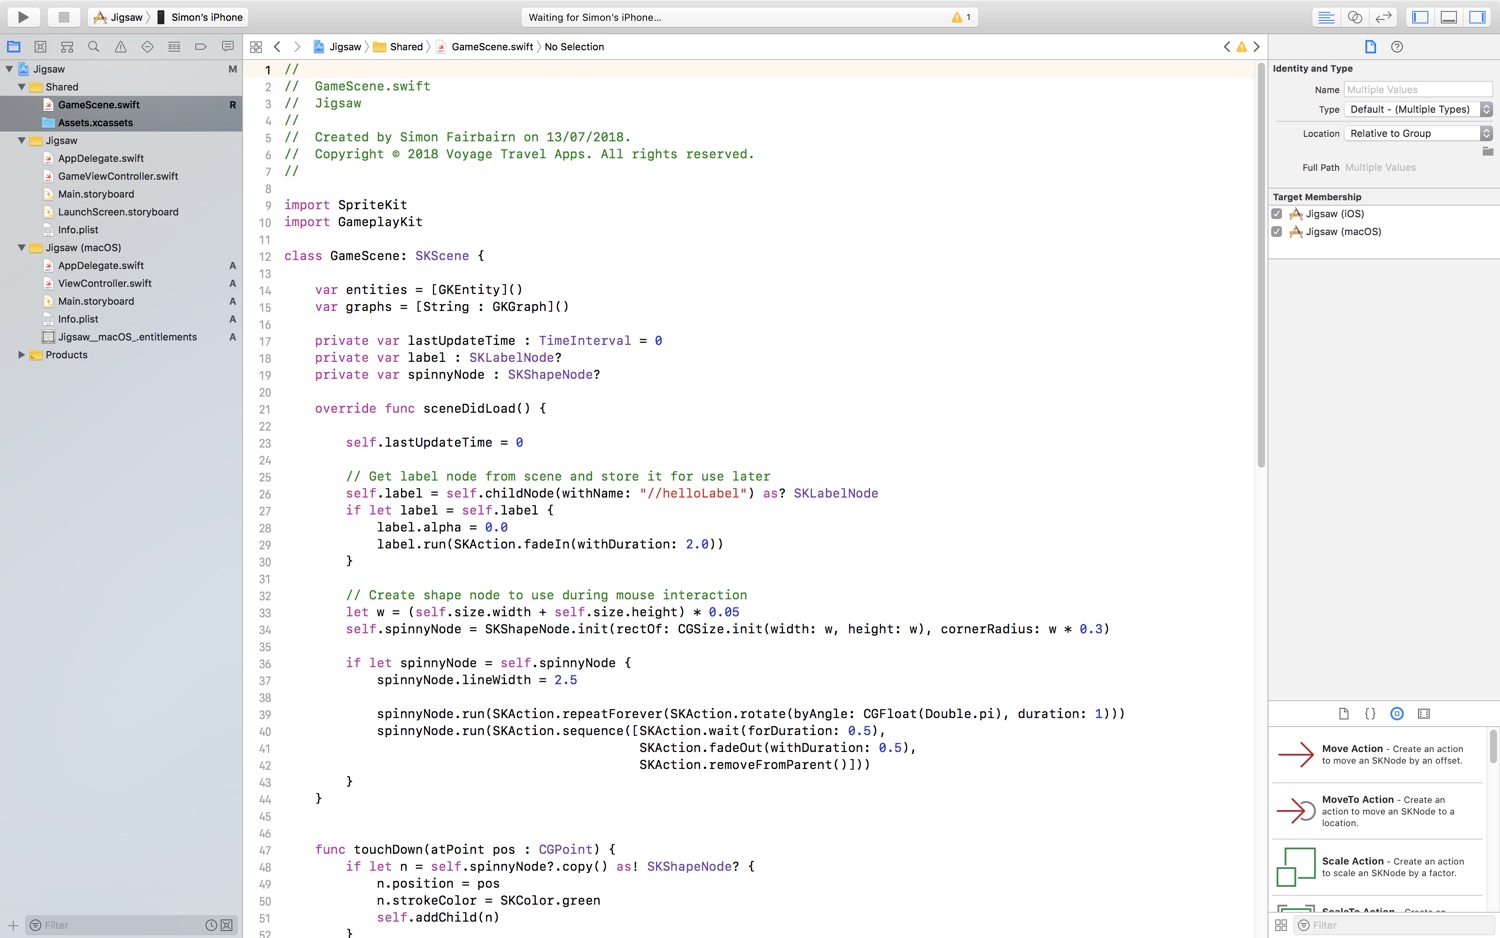 A screenshot of Xcode's code editor. At the left is the File Explorer, with three folders listed. The first is Shared, and contains GameScene.swift and Assets.xcassets. The second is Jigsaw and contains AppDelegate.swift, GameViewController.swift, Main.Storyboard, LaunchScreen.storyboard, and Info.plist. The last folder is Jigsaw (macOS) and contains AppDelegate.swift, ViewController.swift, Main.storyboard, Info.plist, and Jigsaw_macOS_entitlements.